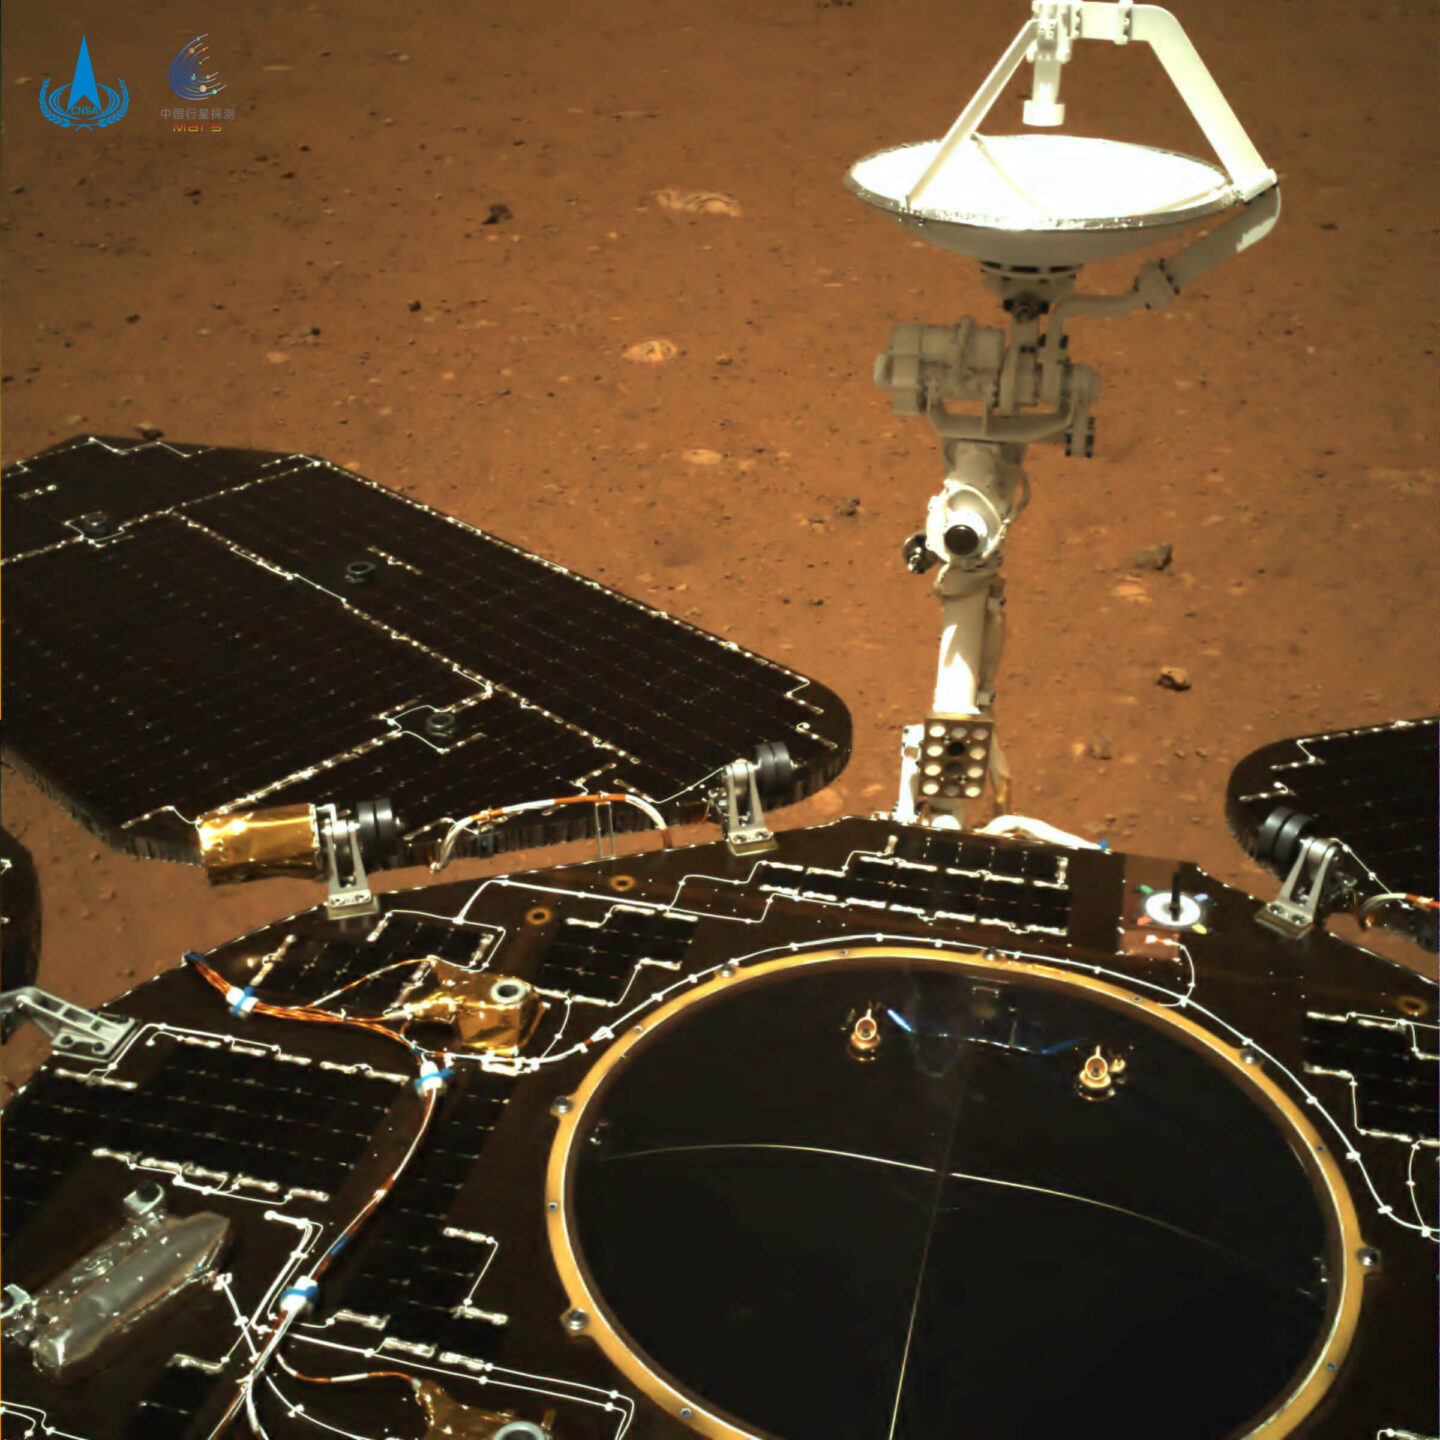 A machine with wings and a satellite. It is black. There is red soil in the background